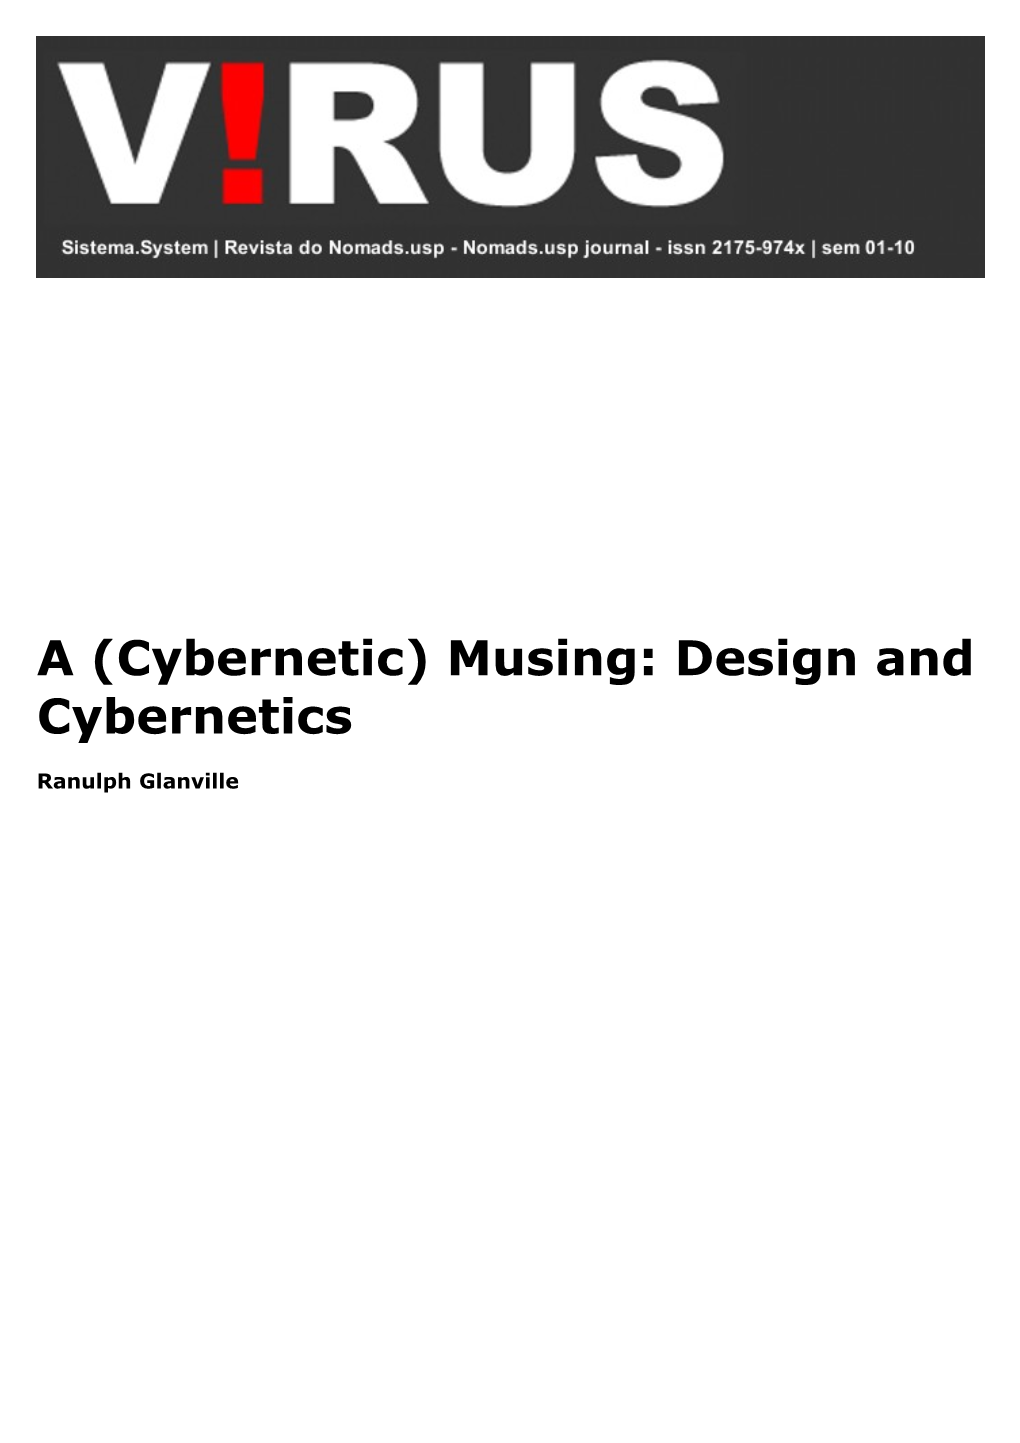 A (Cybernetic) Musing: Design and Cybernetics